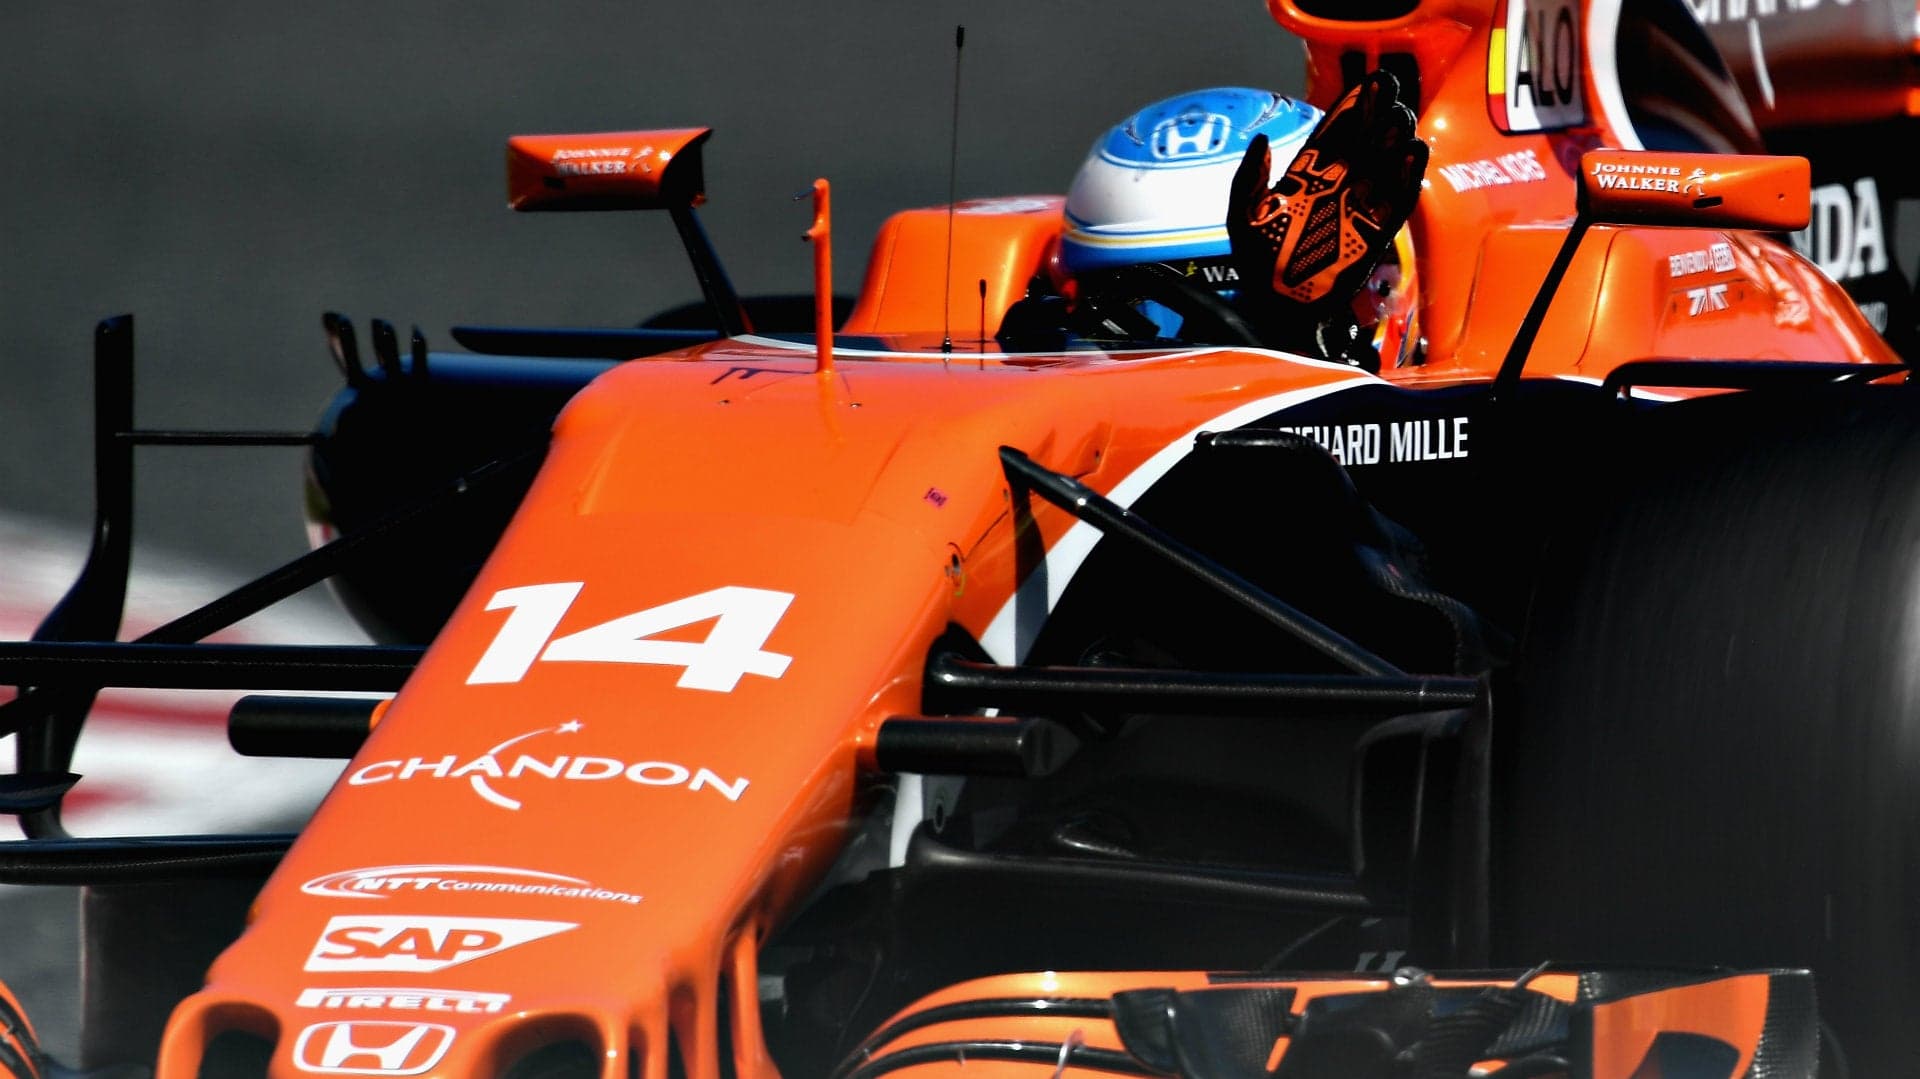 McLaren-Honda Thinks They Have “One of the Best Cars” in F1